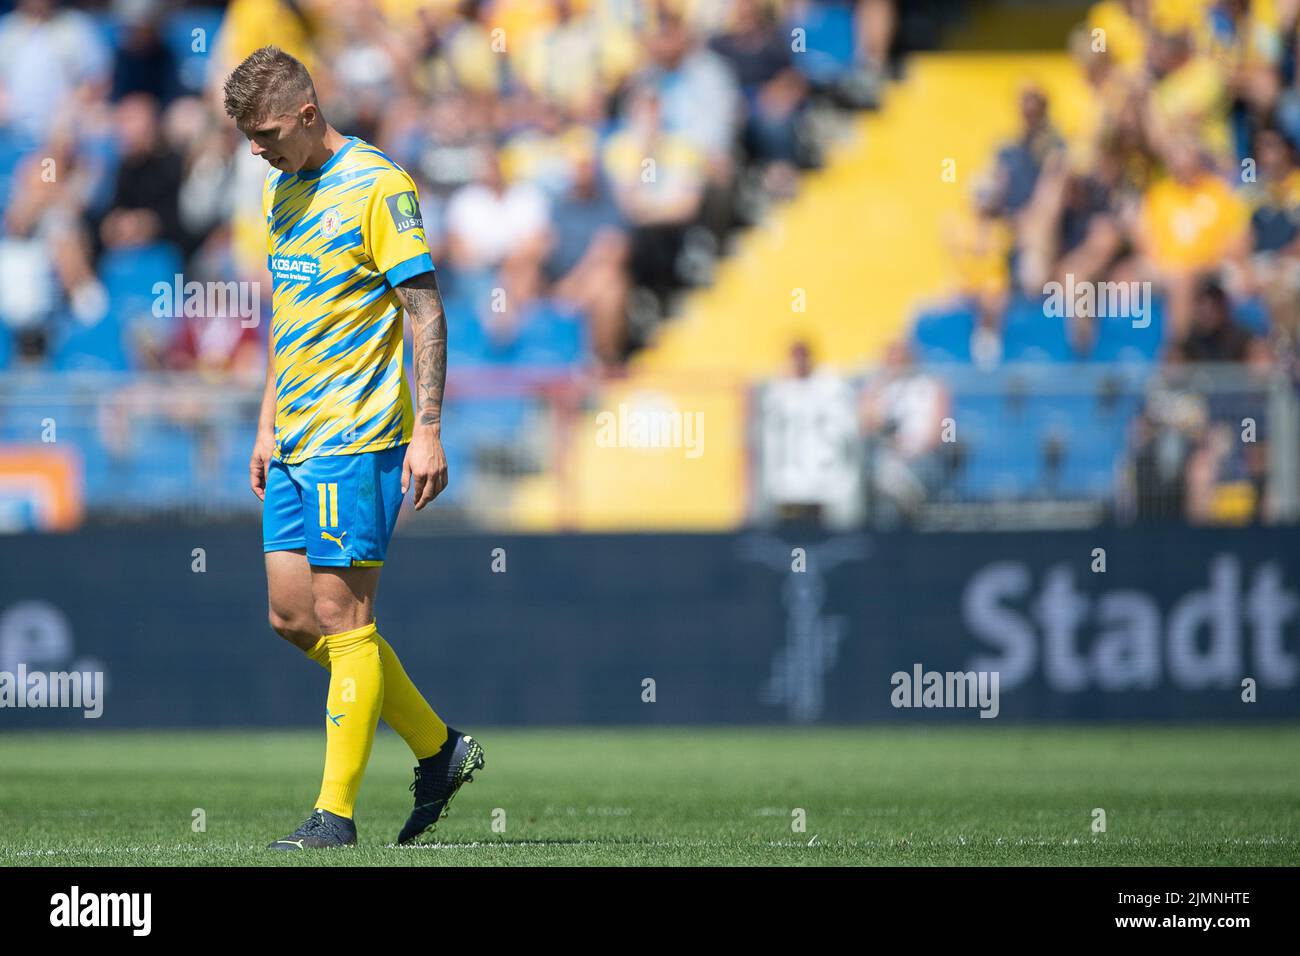 07 August 2022, Lower Saxony, Brunswick: Soccer: 2. Bundesliga, Eintracht Braunschweig - Darmstadt 98, Matchday 3, Eintracht-Stadion. Braunschweig's Immanuel Pherai walks off the field with his head down. Photo: Swen Pförtner/dpa - IMPORTANT NOTE: In accordance with the requirements of the DFL Deutsche Fußball Liga and the DFB Deutscher Fußball-Bund, it is prohibited to use or have used photographs taken in the stadium and/or of the match in the form of sequence pictures and/or video-like photo series. Stock Photo